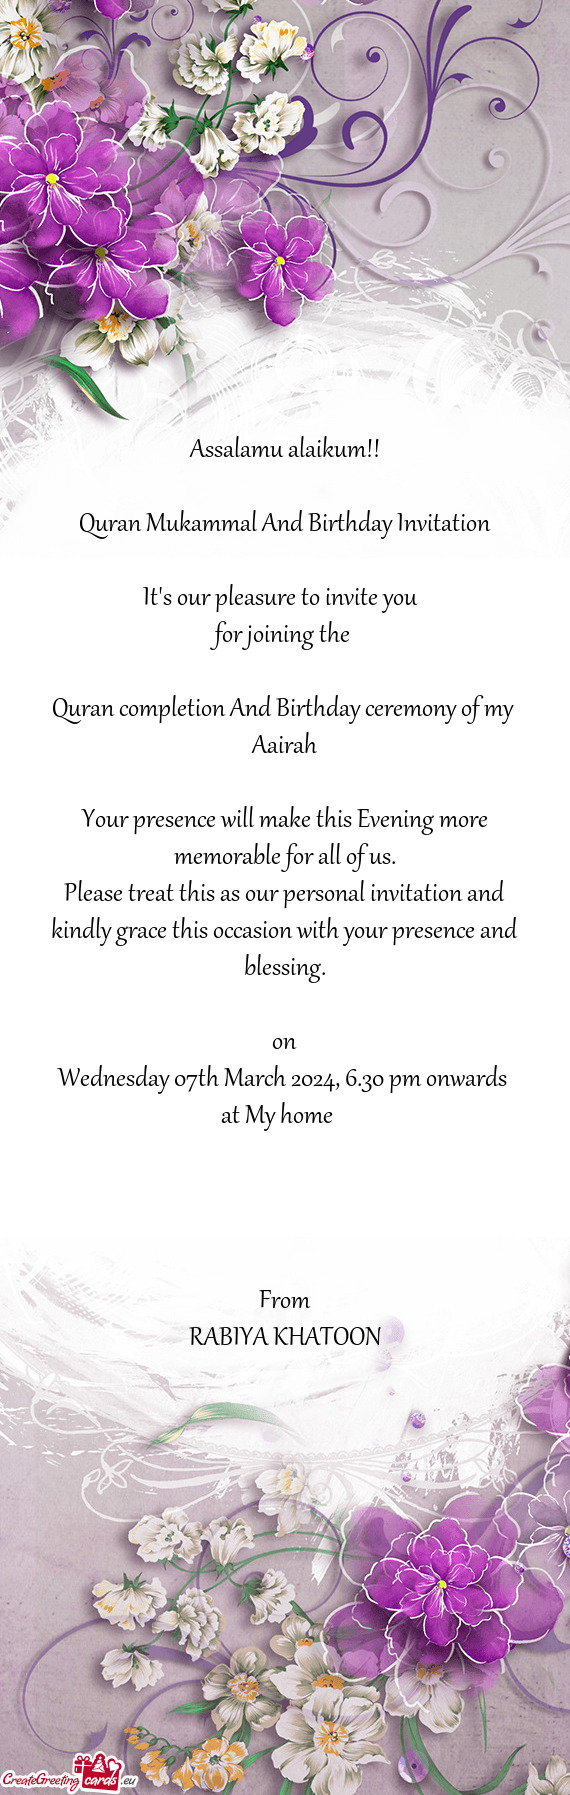 Quran completion And Birthday ceremony of my Aairah